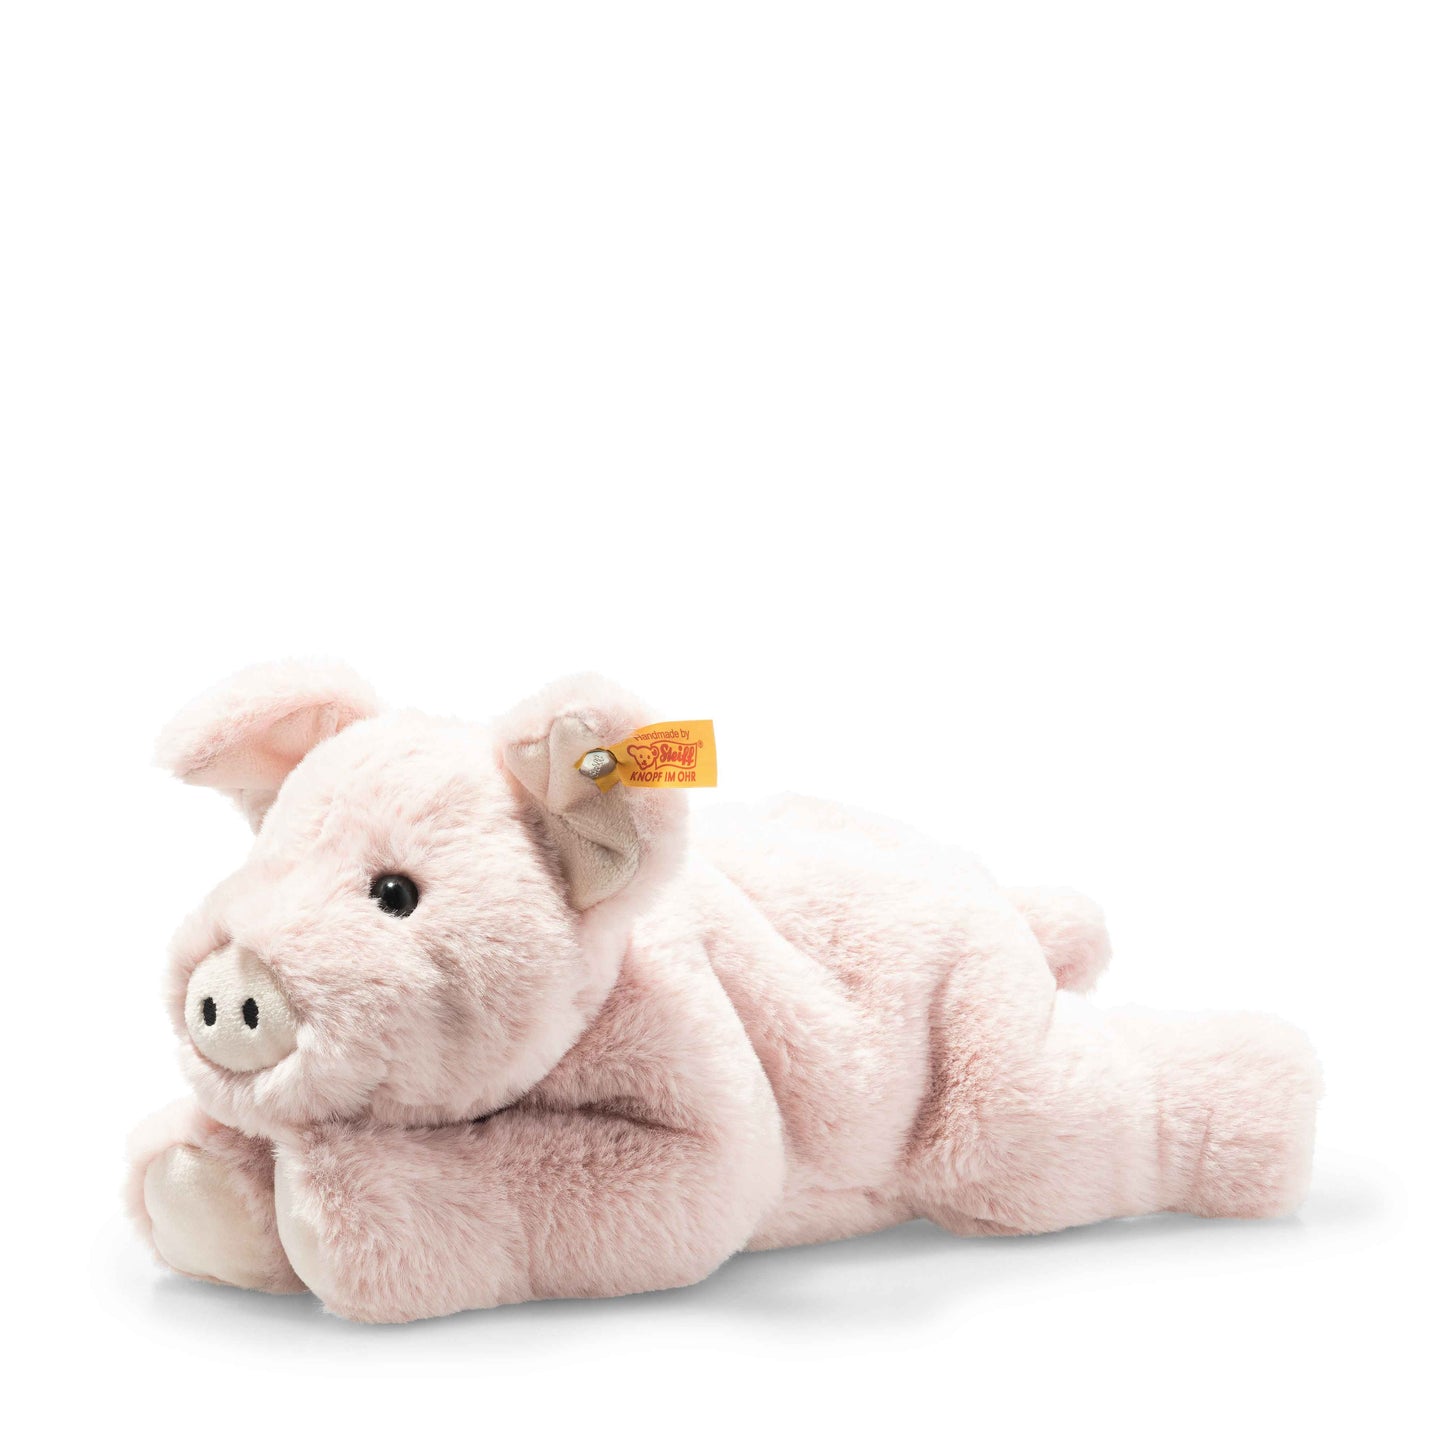 Piko Pig Plush Toy, 11 Inches